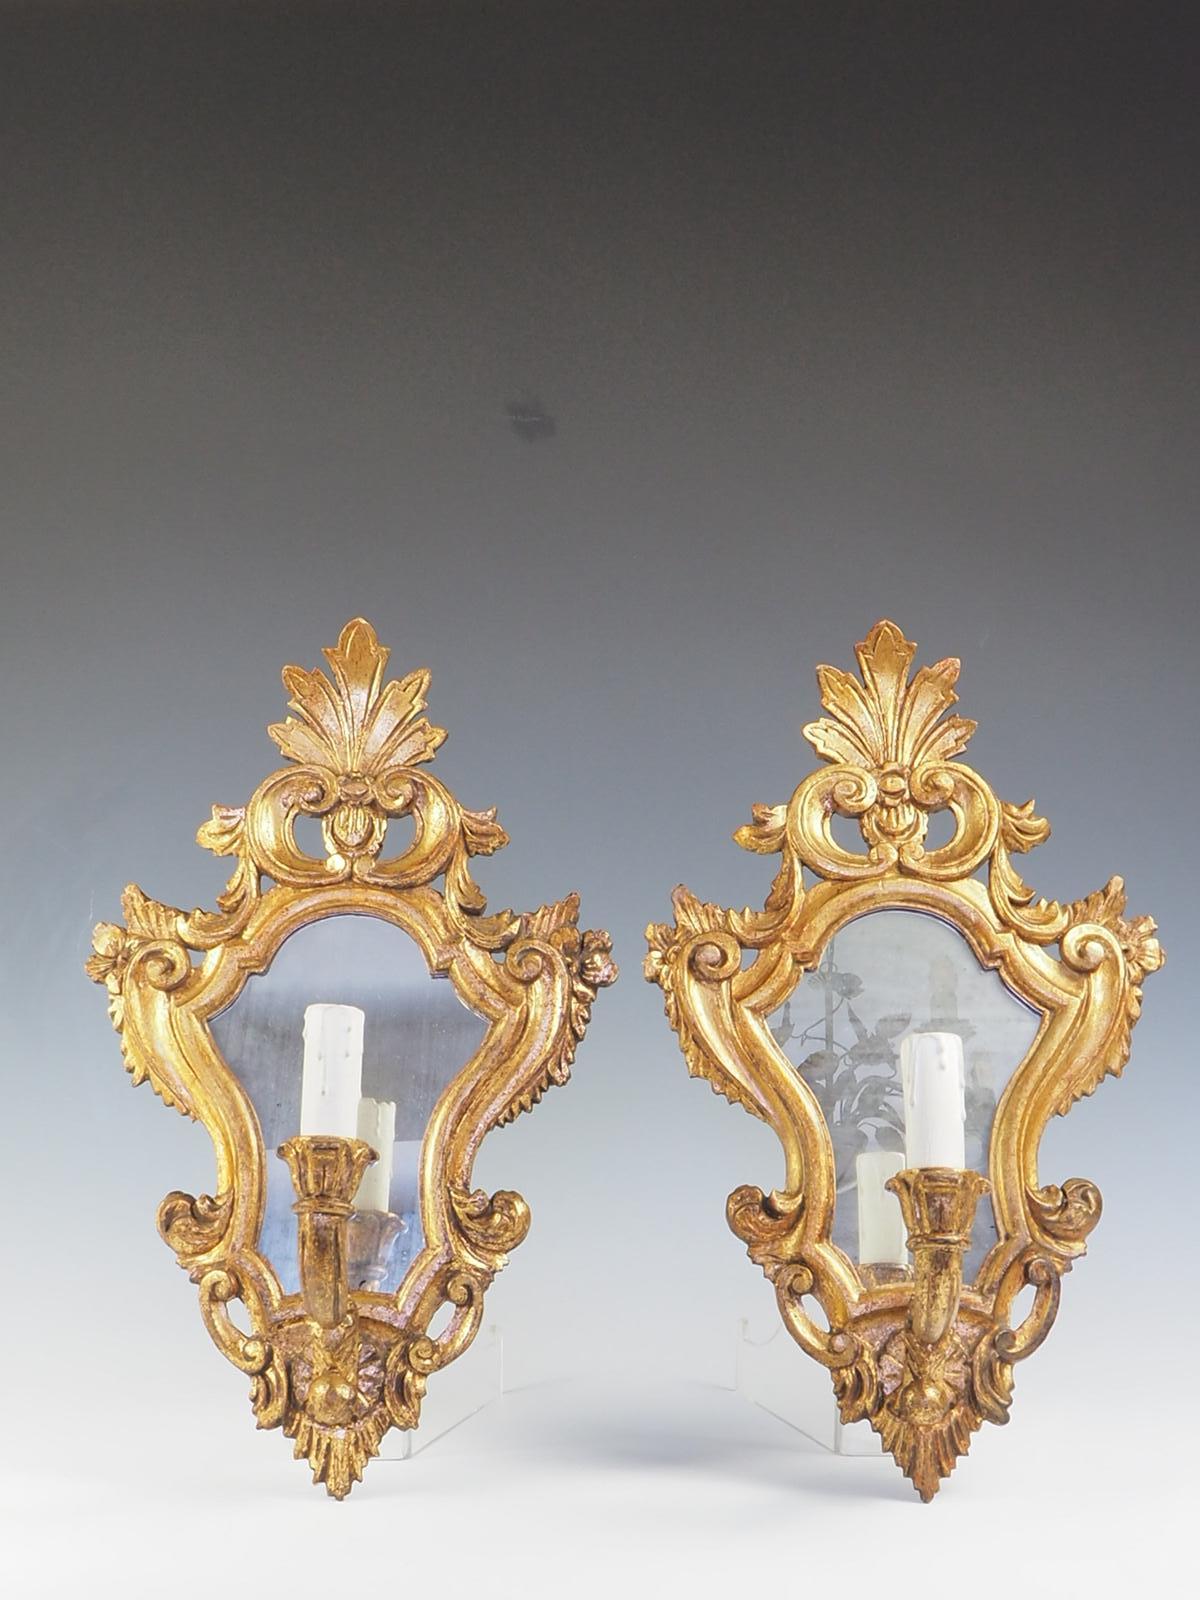 A stunning pair of Venetian ‘Girandole’ wall mirror lights, meticulously crafted with exquisite details. These wall lights feature finely carved, painted, and gilt timber frames that exude elegance and sophistication.

Adorned with their original,